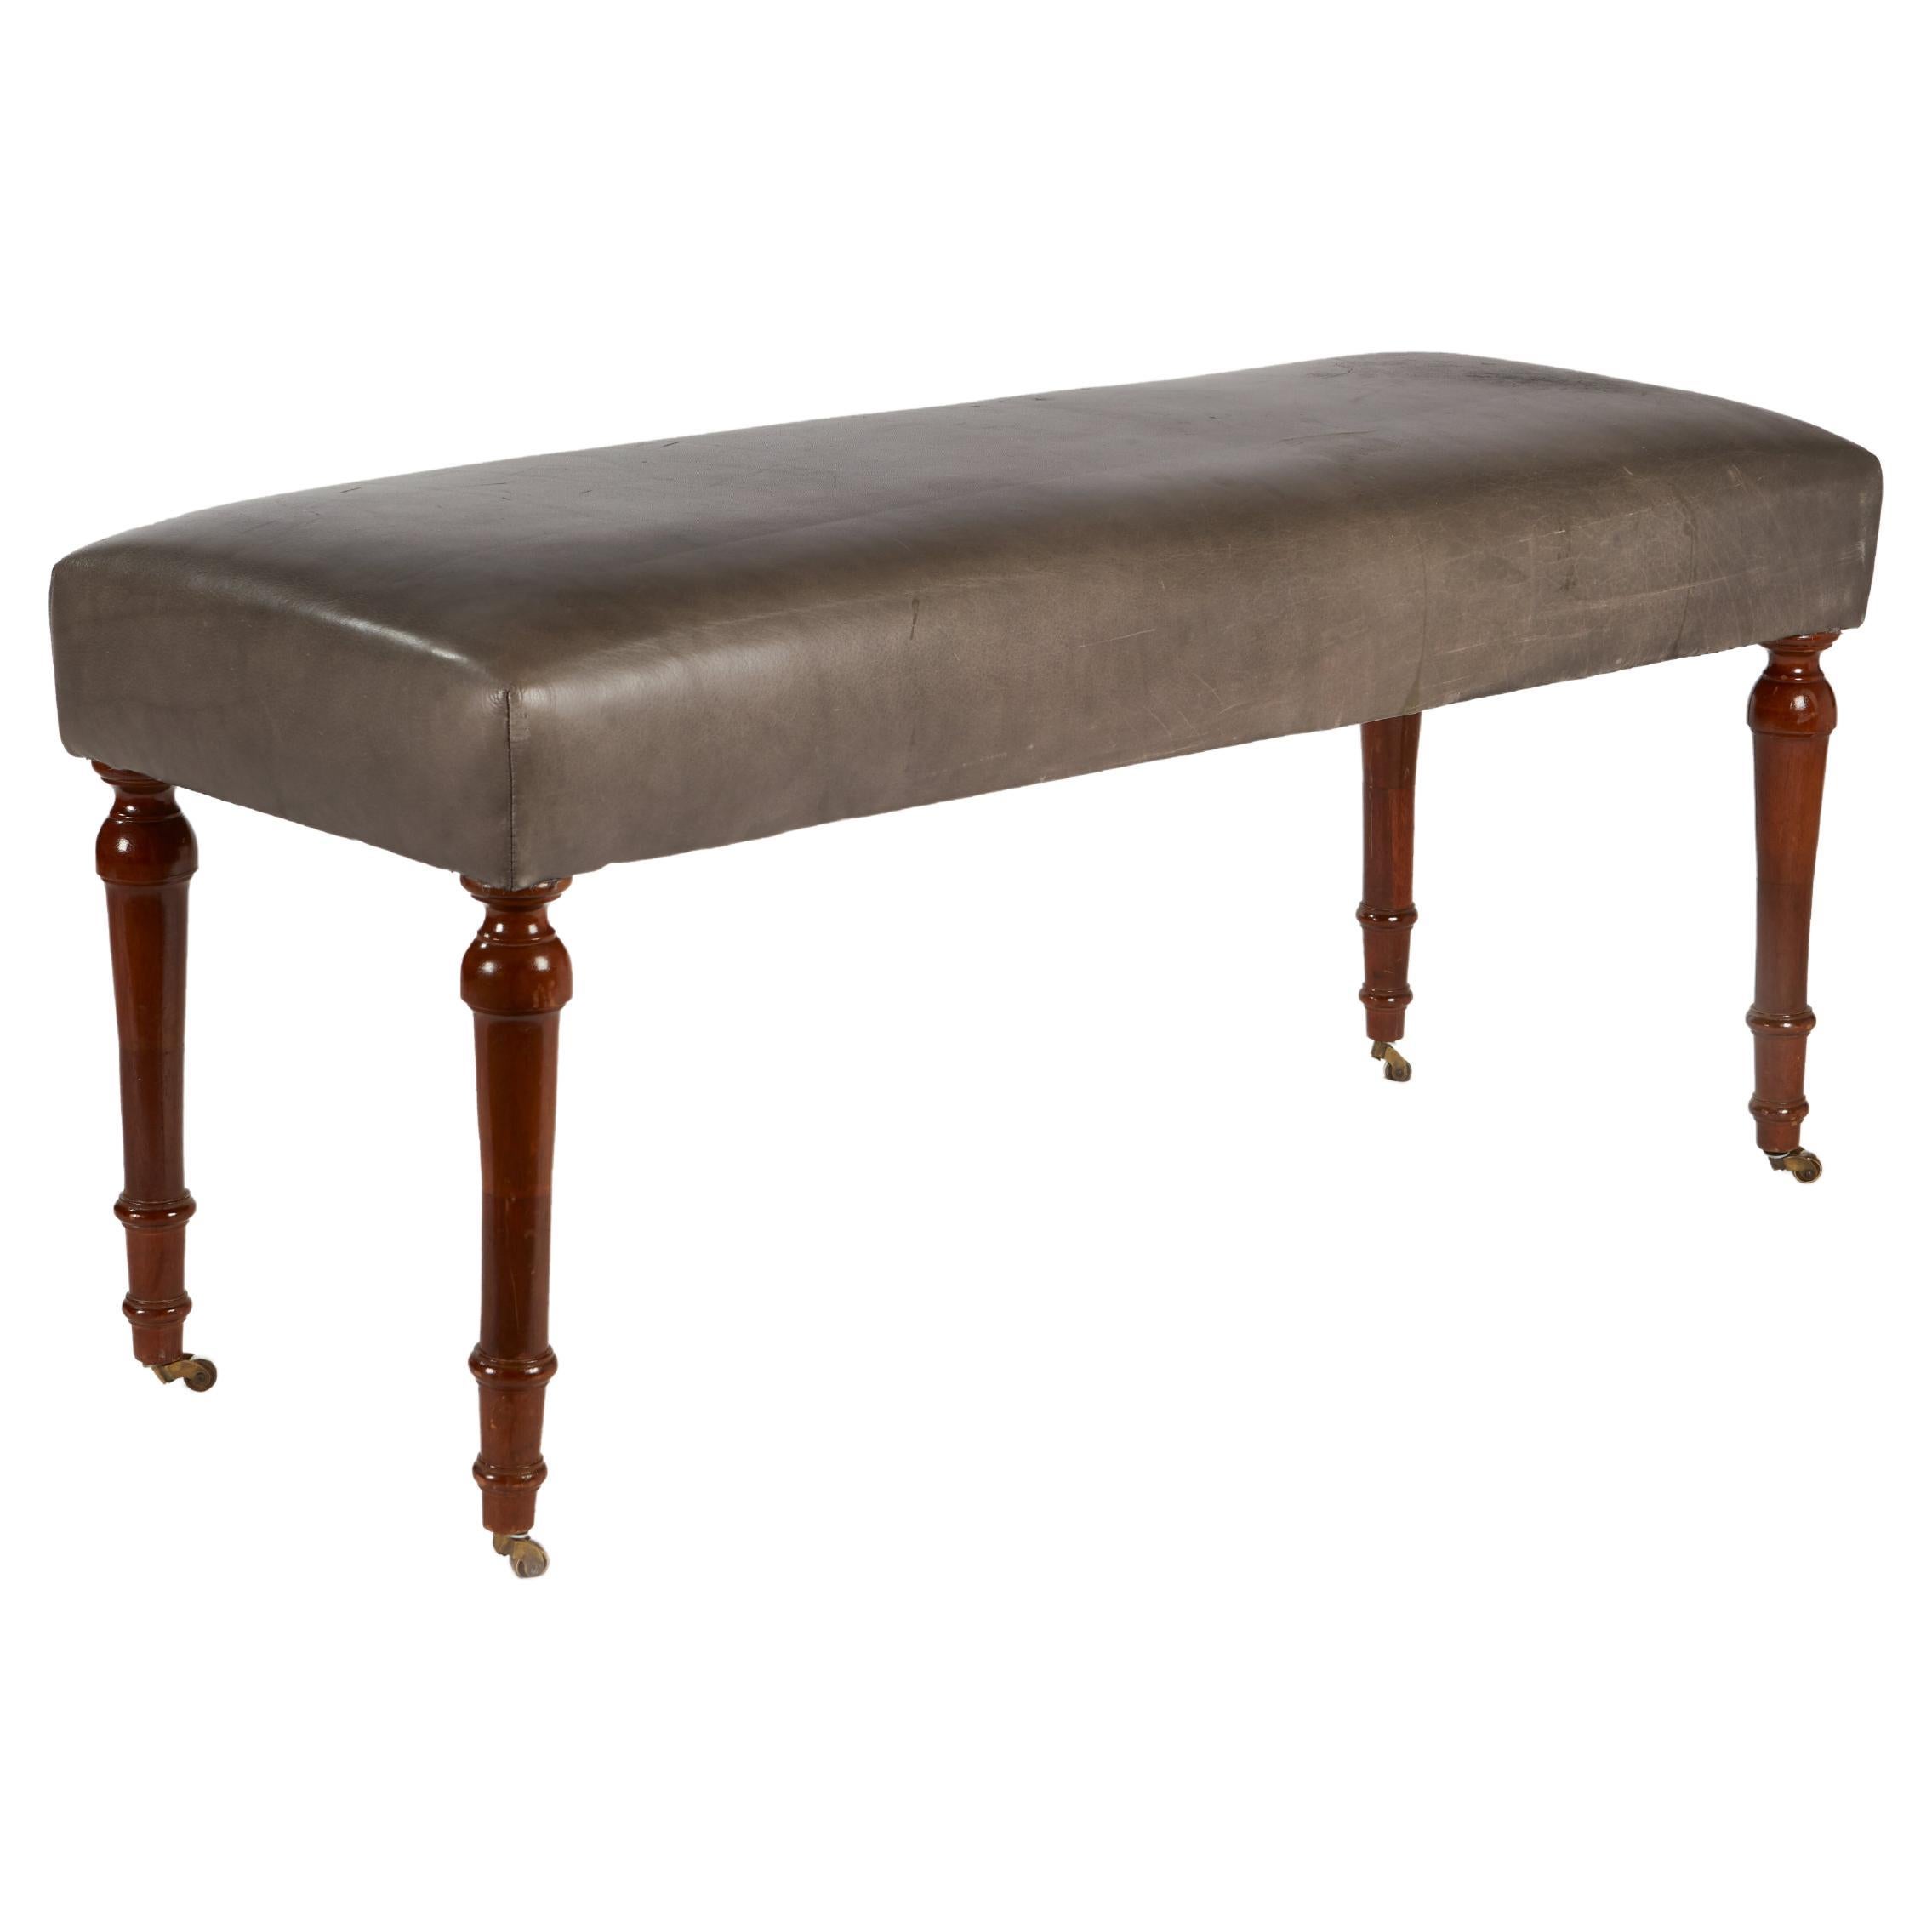 French Louis XVI Style Bench with Mahogany Legs and Brass Casters